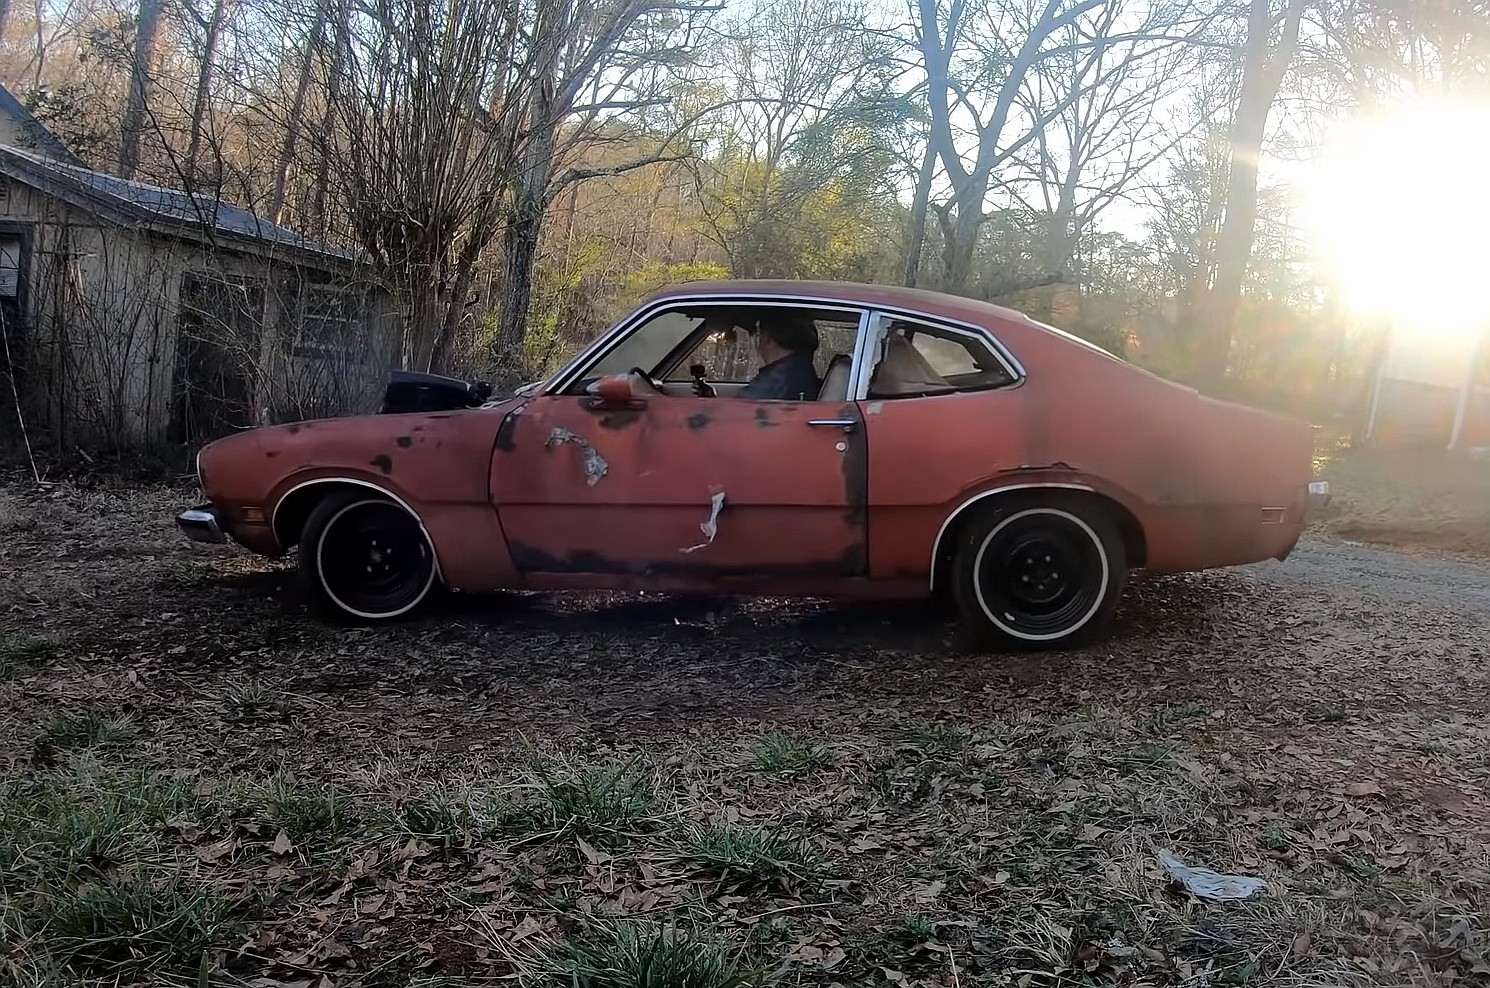 1973 mercury comet gt takes first drive in 35 years almost turns into a fireball 3